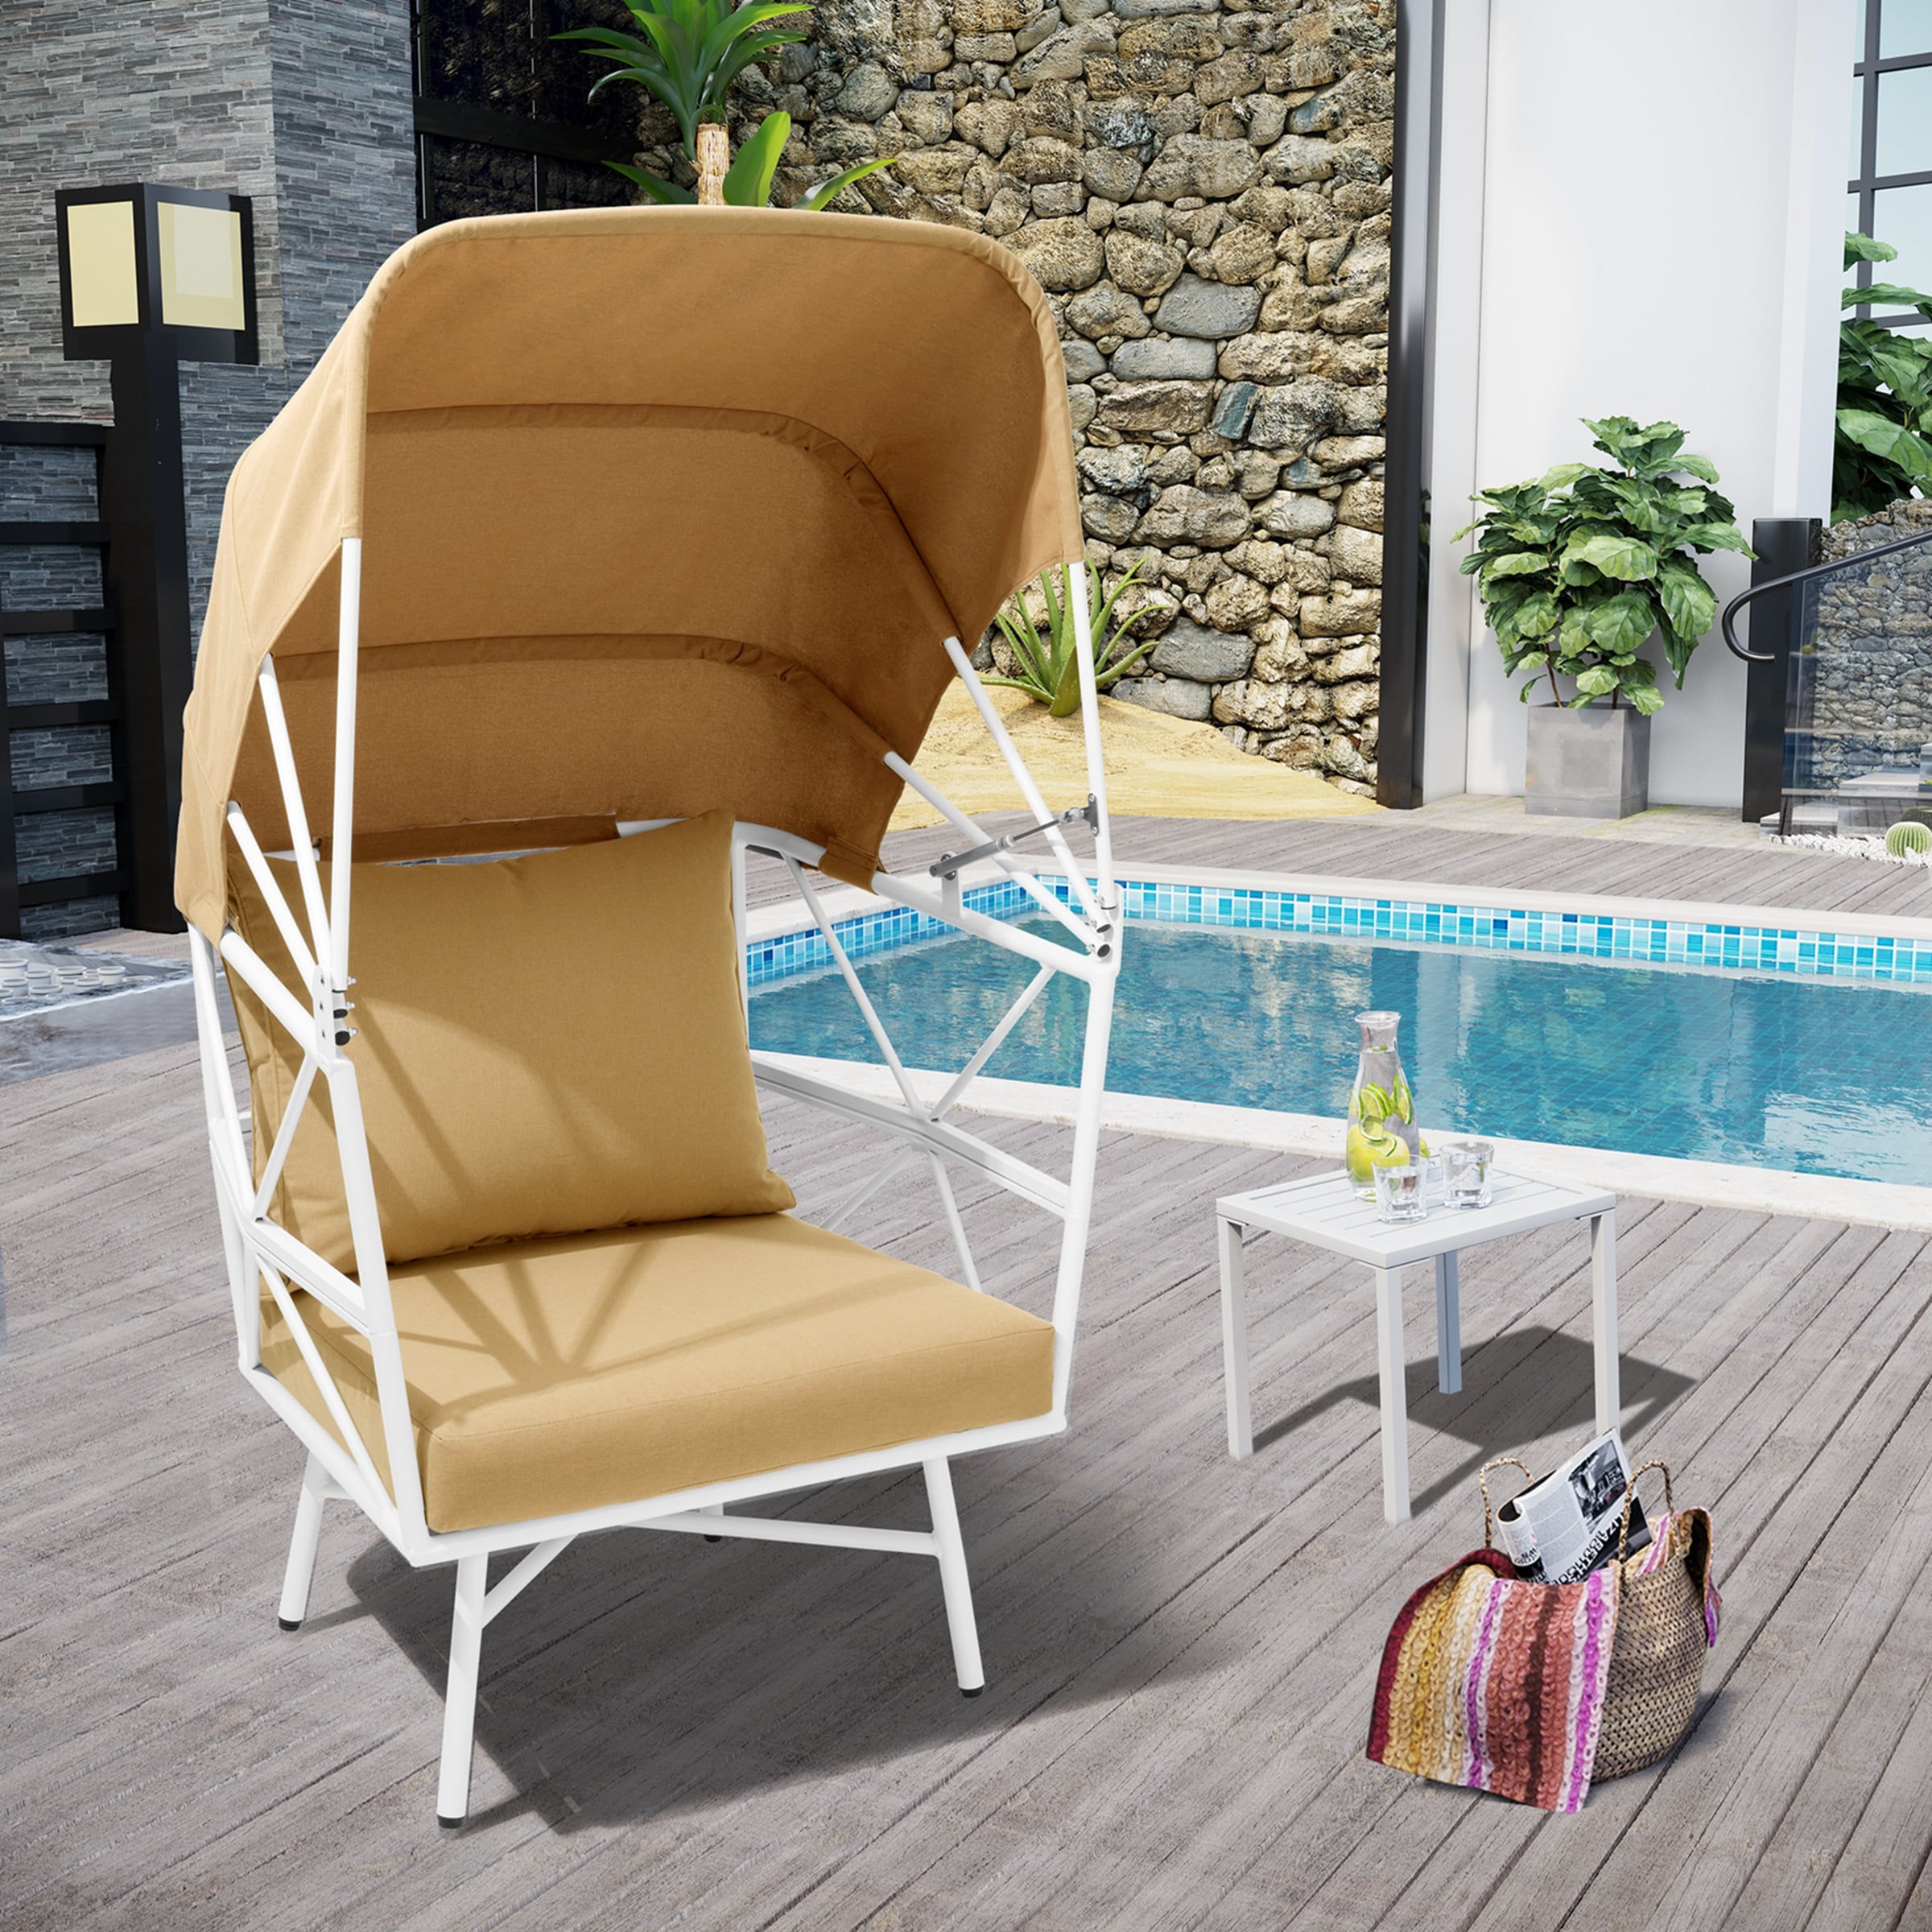 Outdoor Indoor Sofa Egg Chair With Retractable Sun Canopy